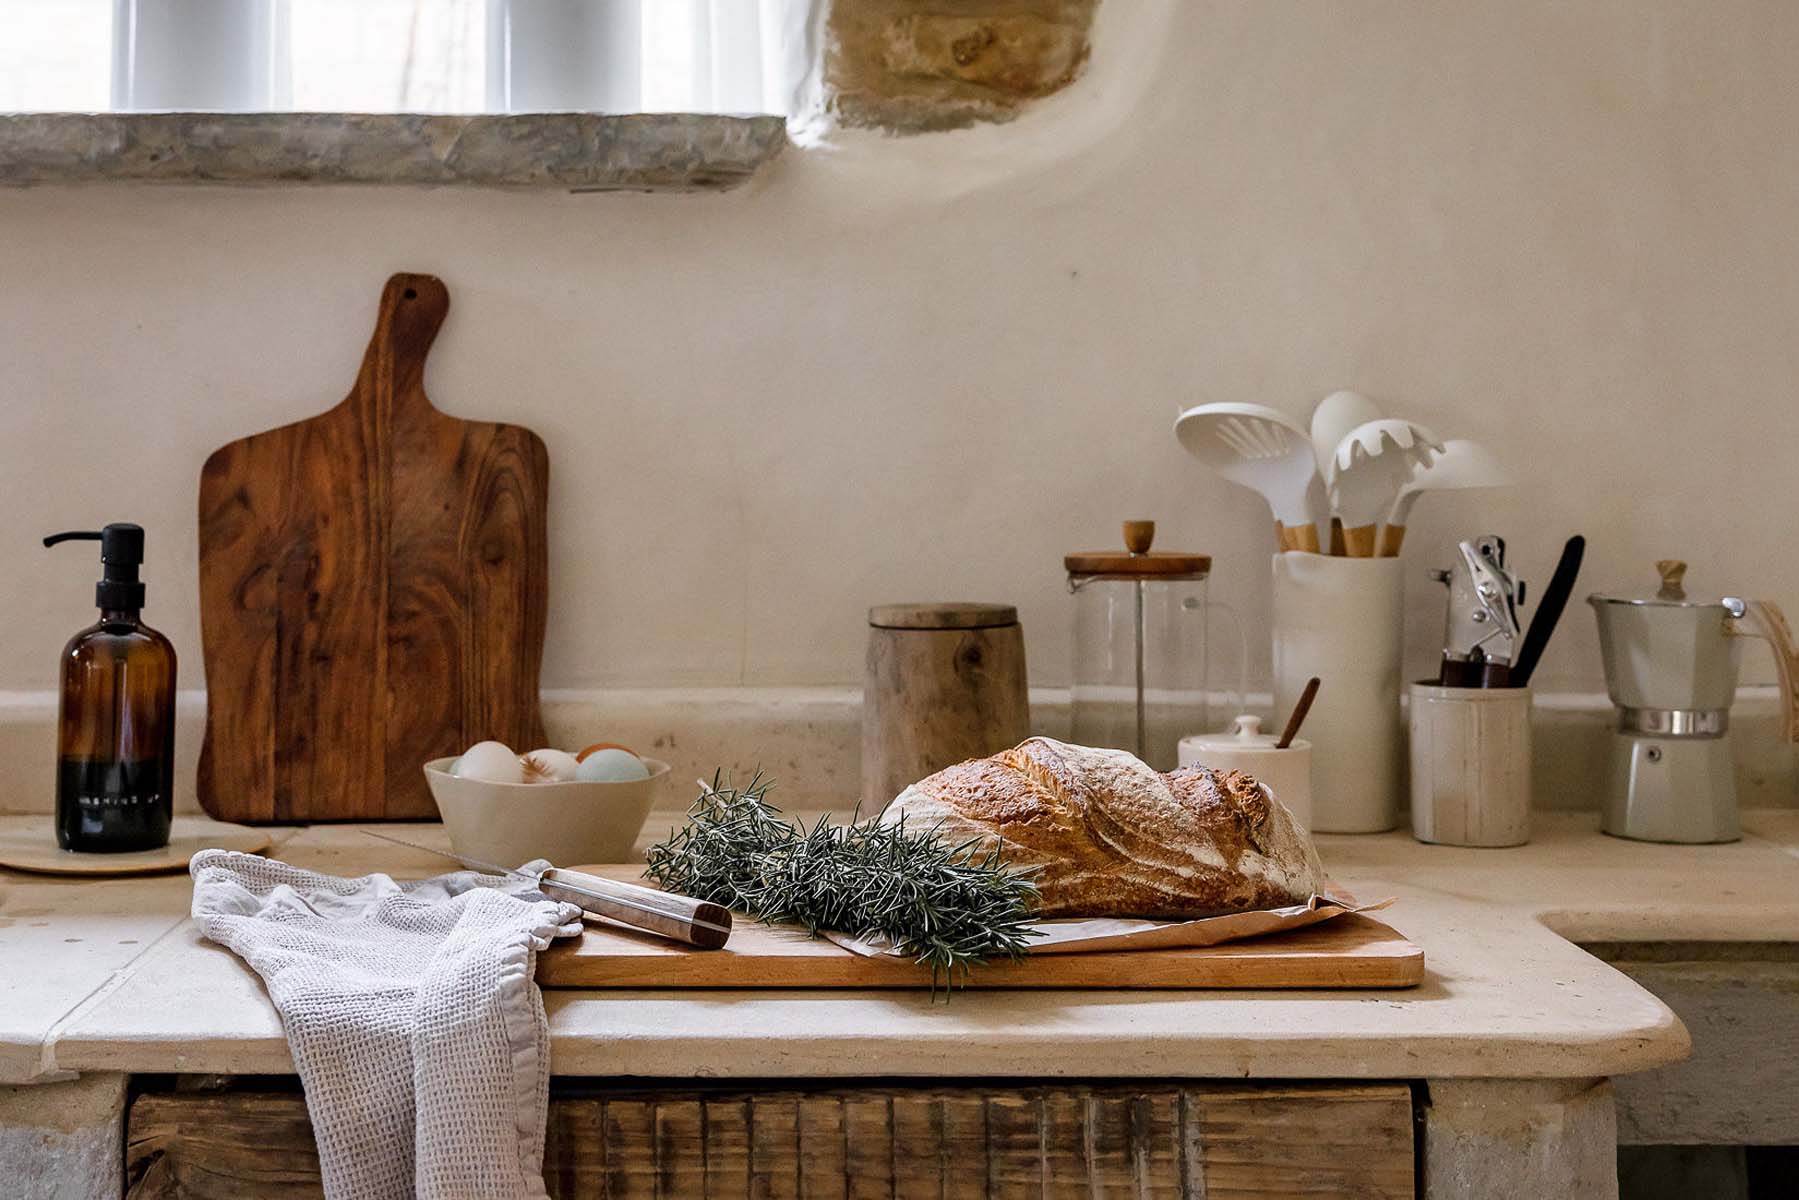 Rustic loaf of bread and a bunch of herbs on a cottage kitchen counter